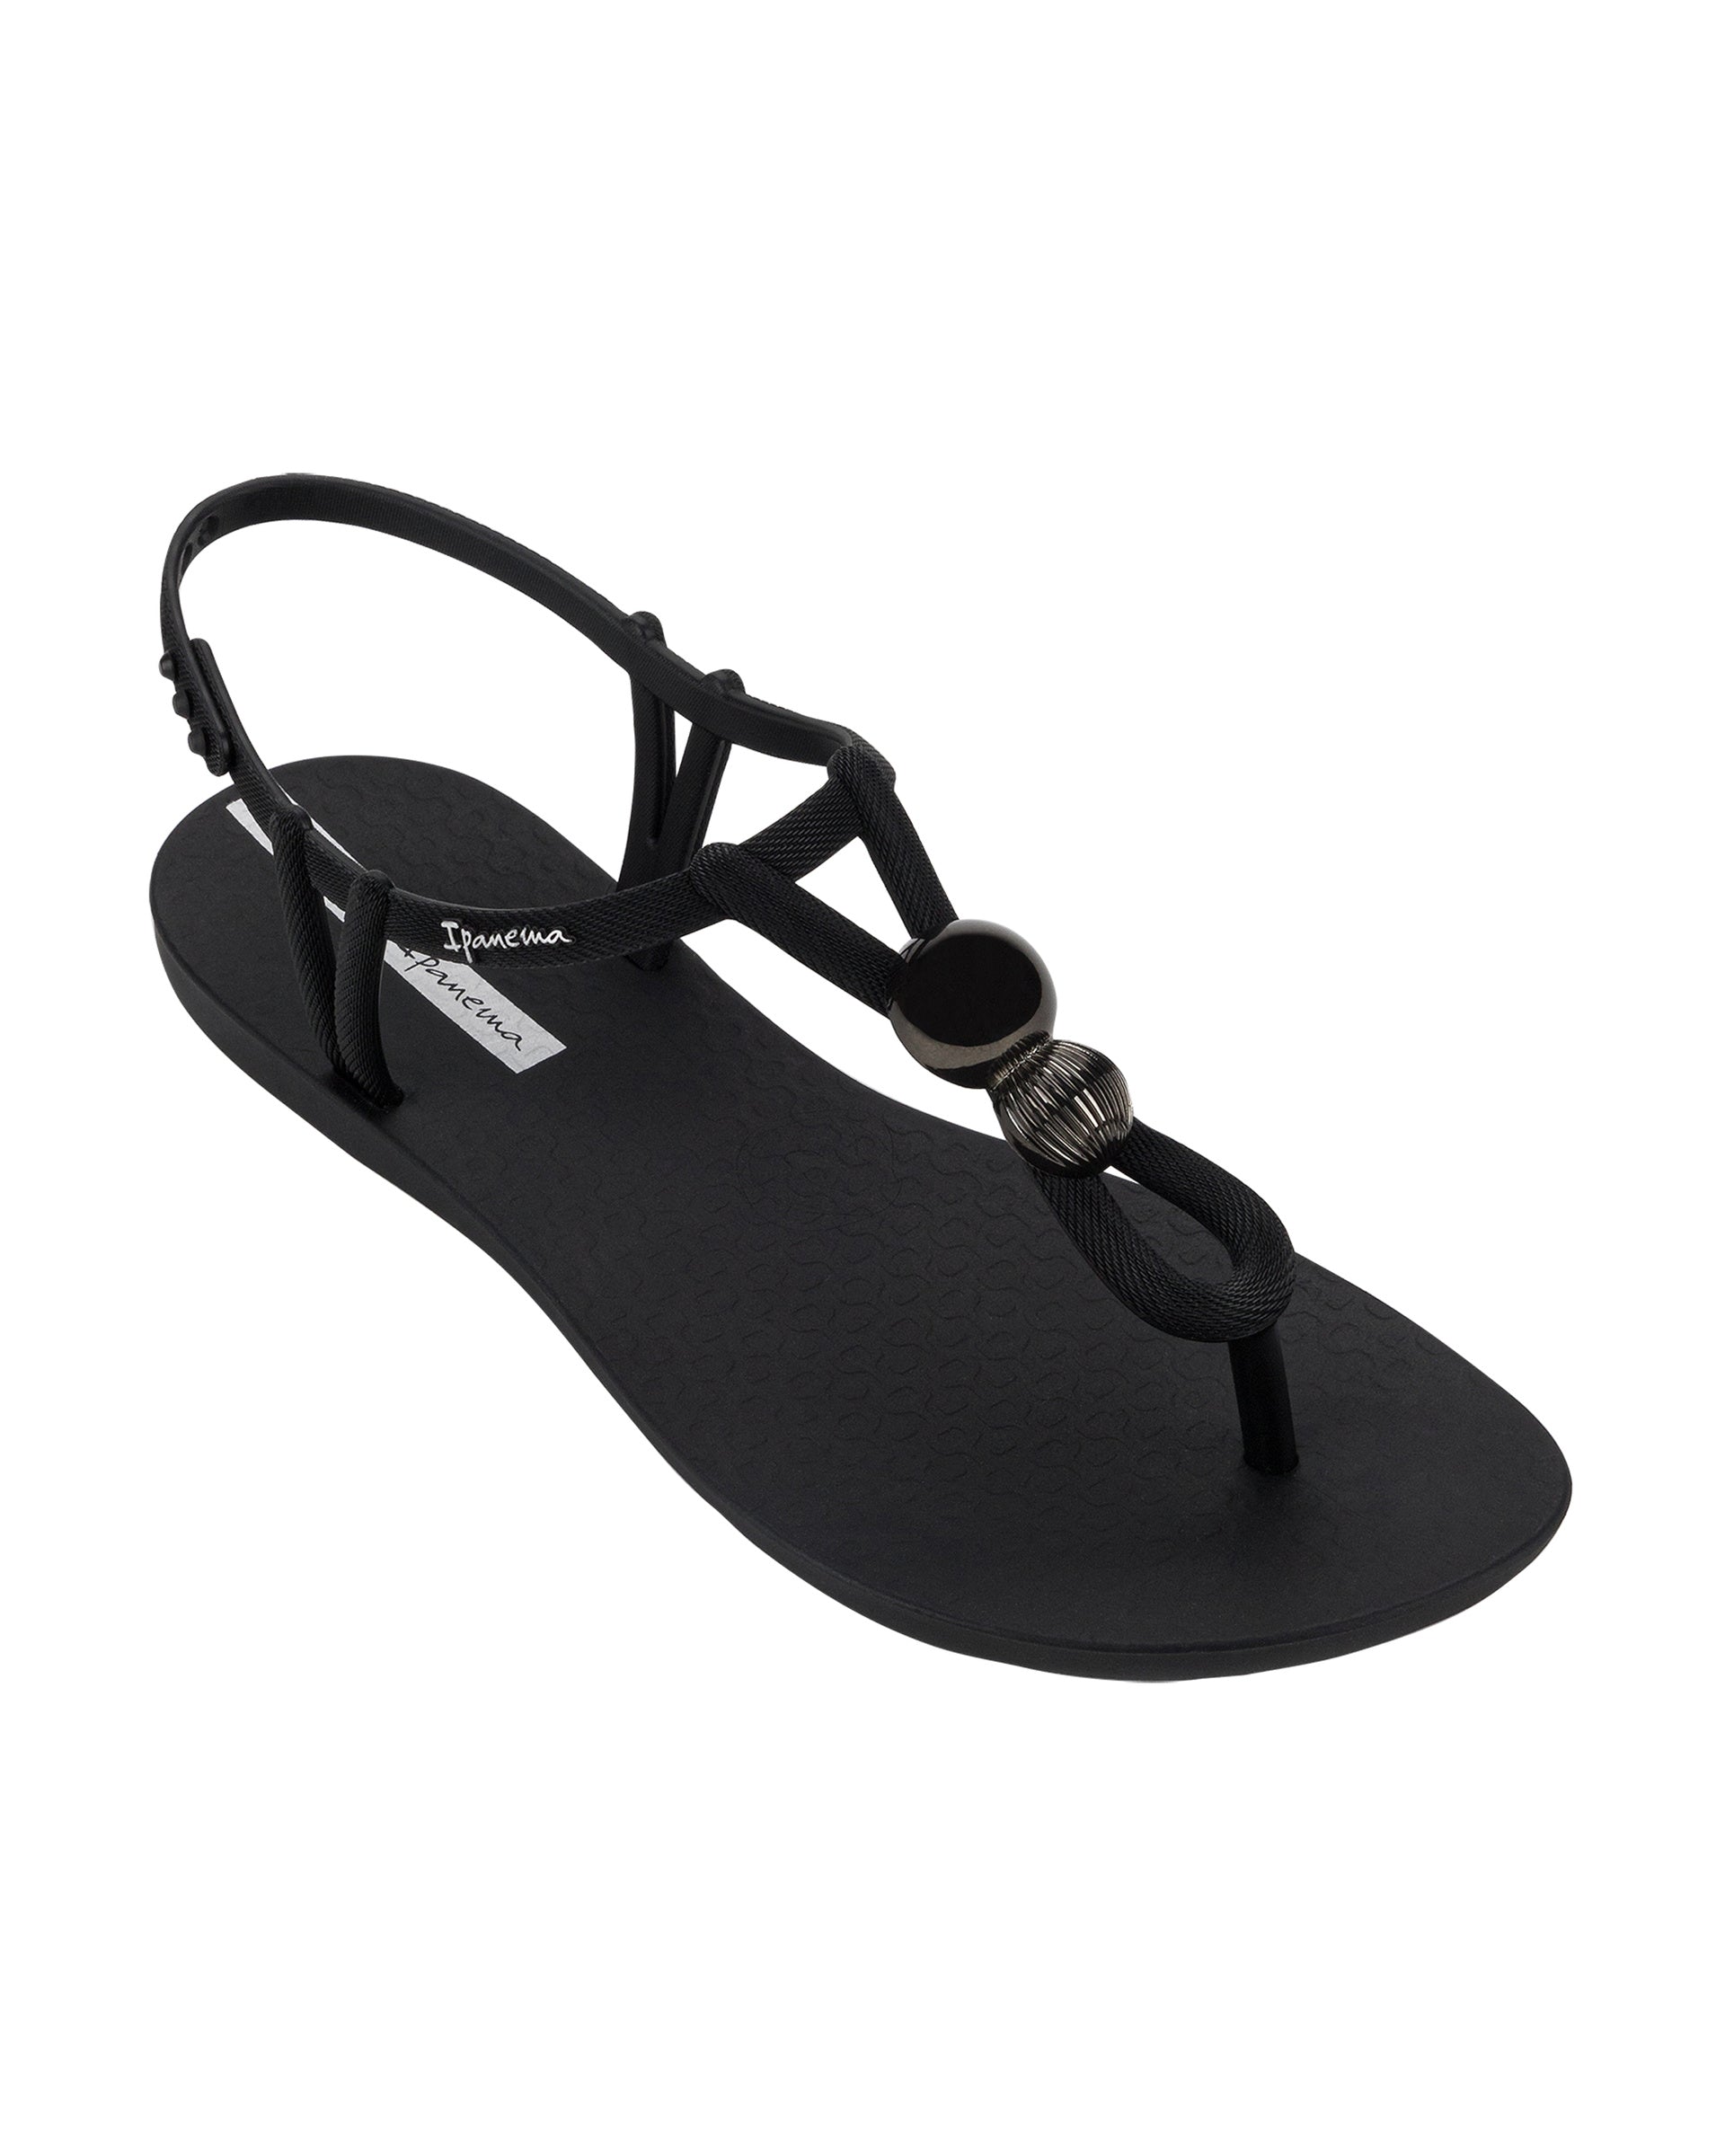 Angled view of a black Ipanema Class Spheres women's t-strap sandal with metallic bauble.